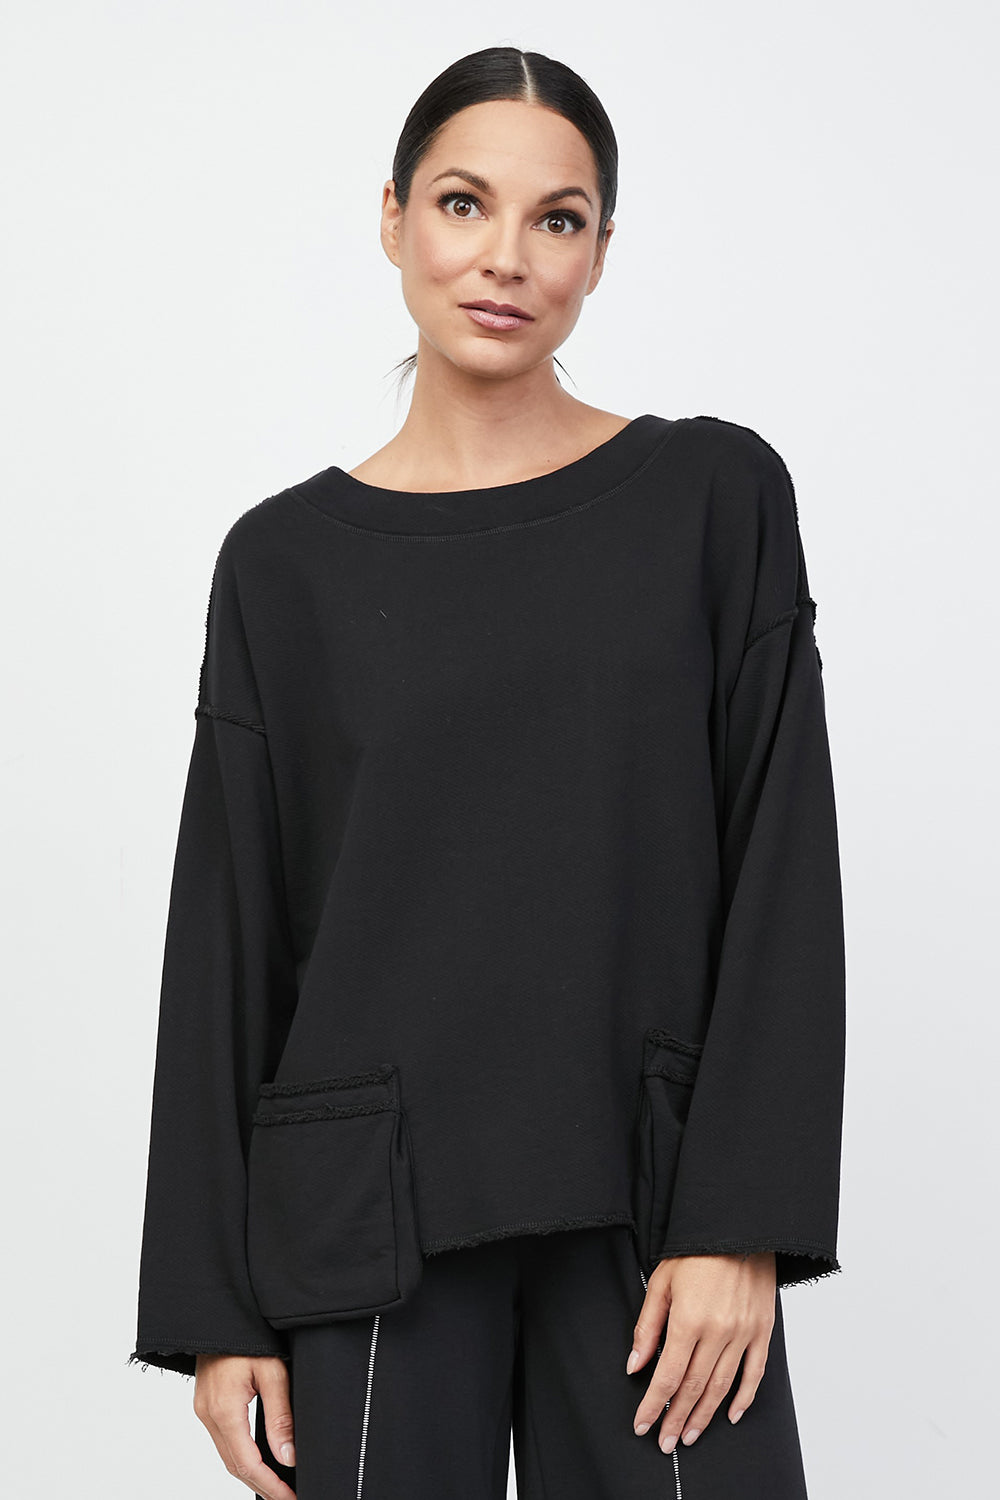 Liv Long Sleeve Top - Style L24019653